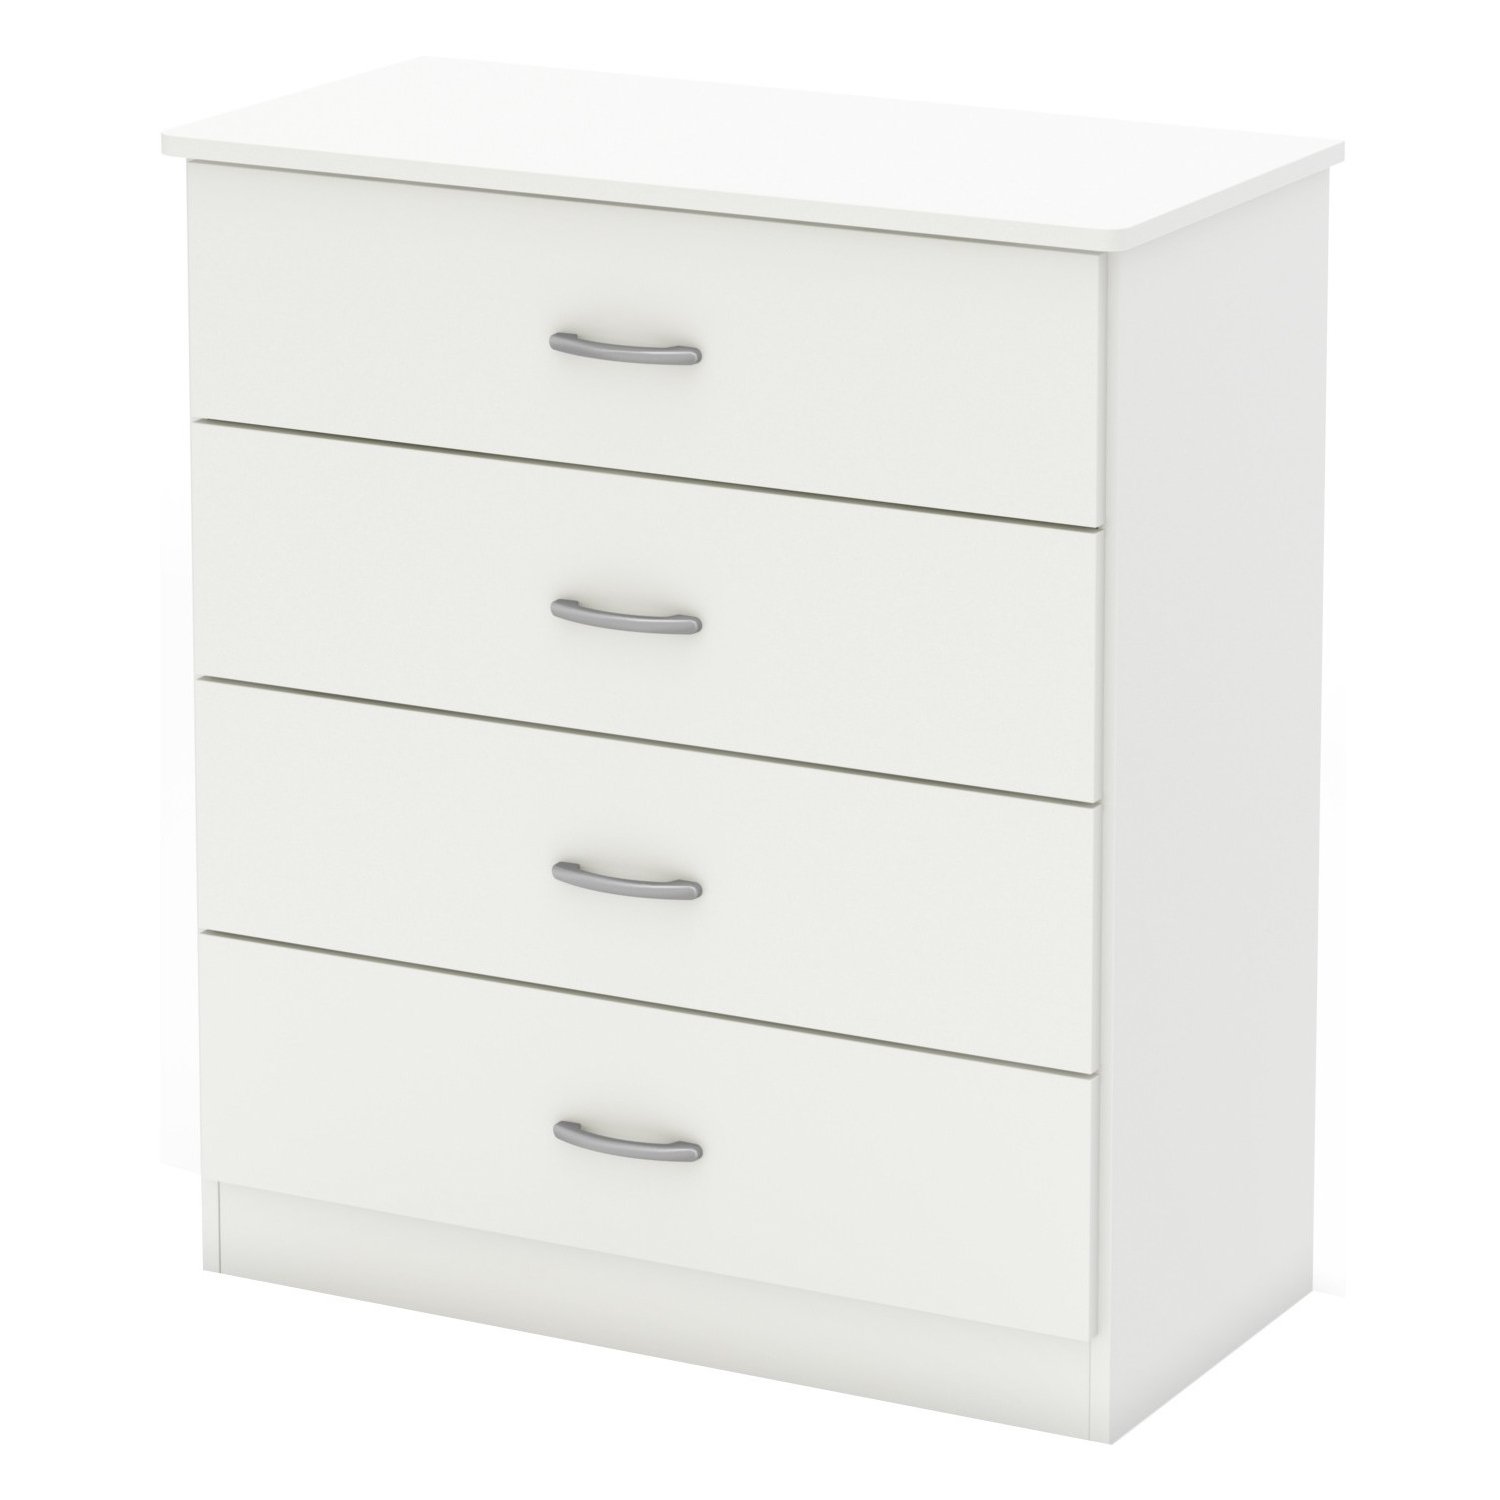 South Shore Smart Basics 4-Drawer Chest, Pure White - image 2 of 4